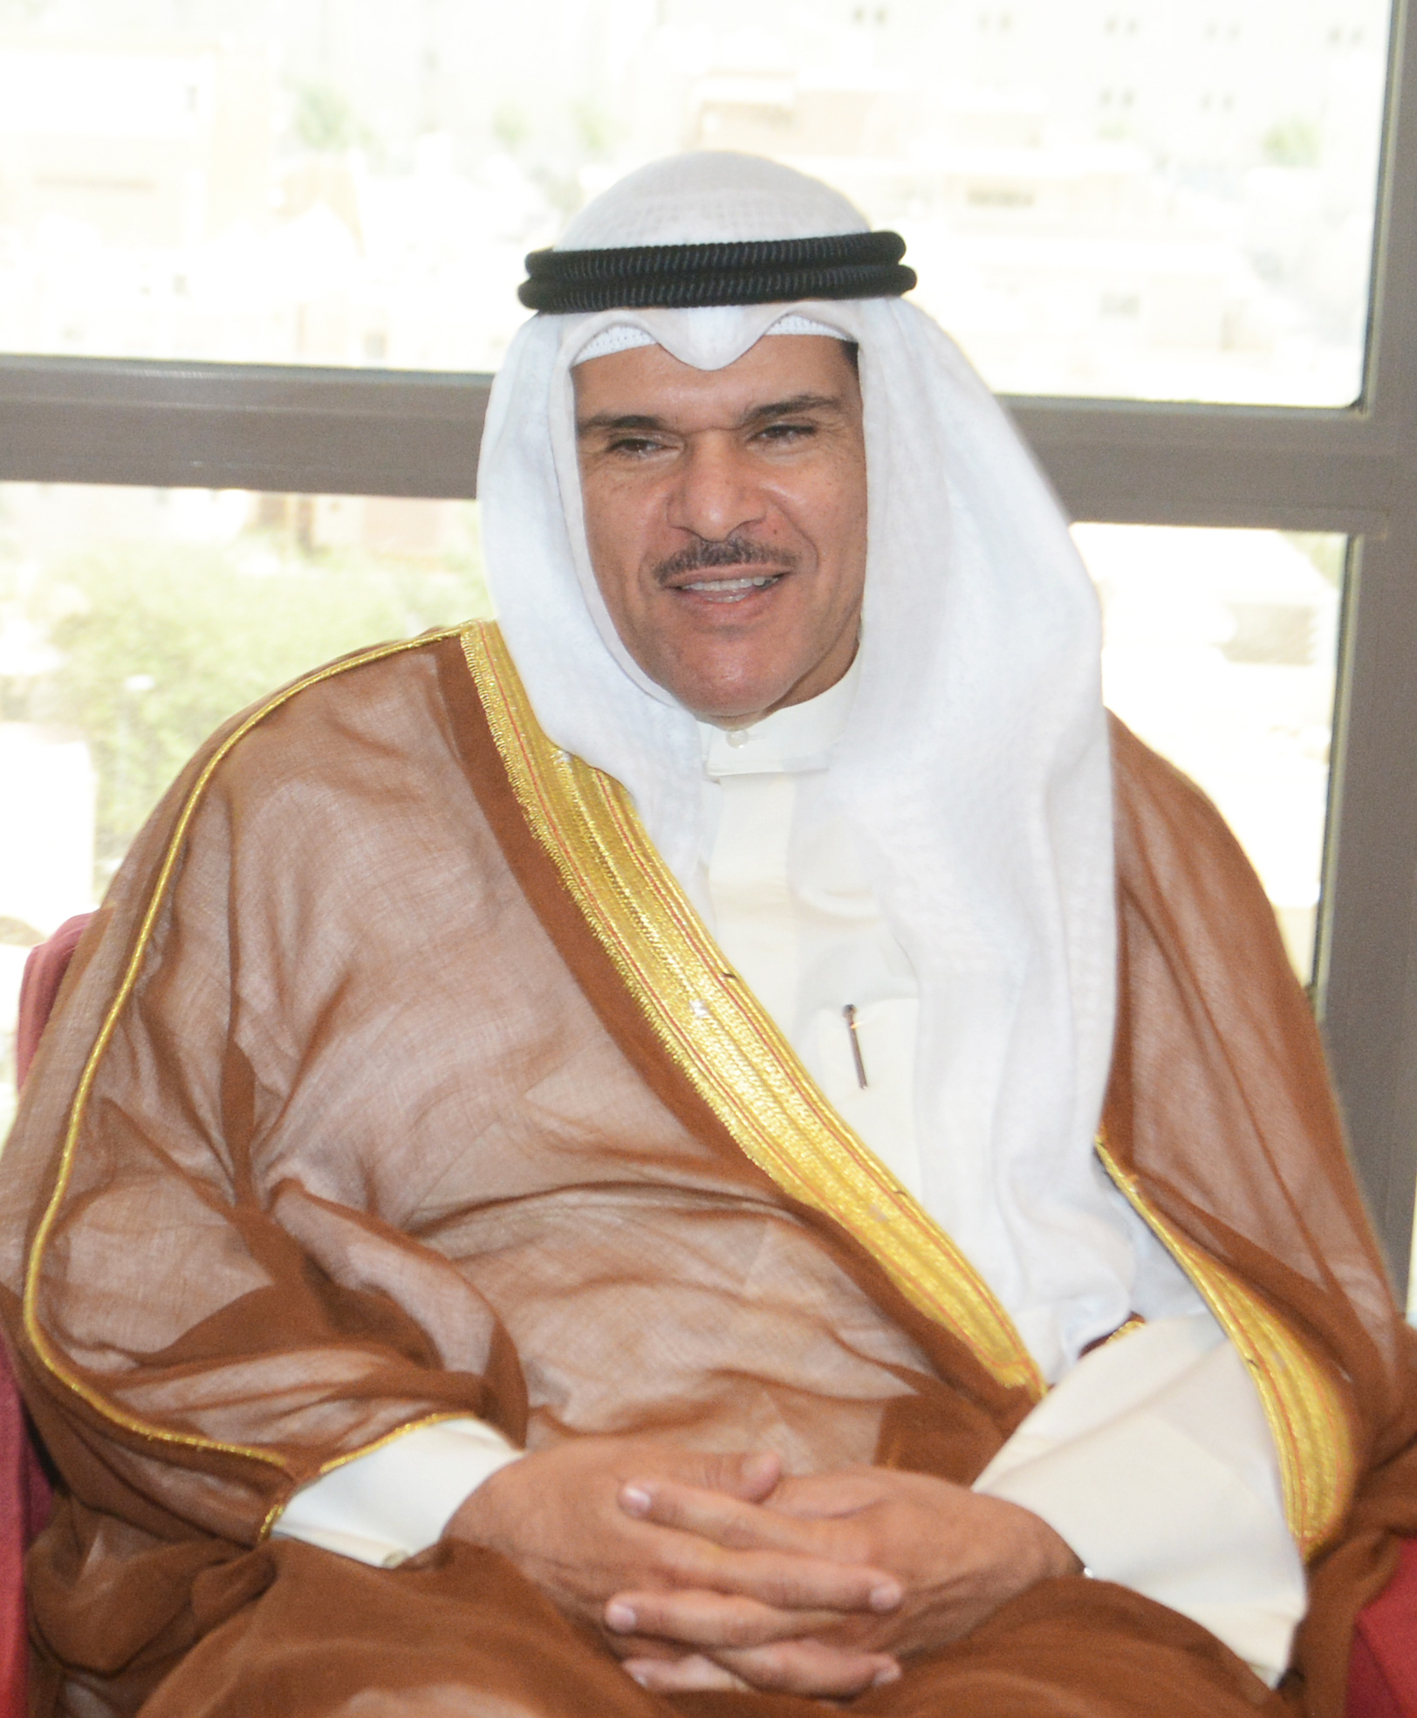 Kuwait's Minister of Information, Minister of State for Youth Affairs, and Chairman of the National Council for Culture, Arts, and Letters (NCCAL) Sheikh Salman Sabah Al-Salem Al-Humoud Al-Sabah